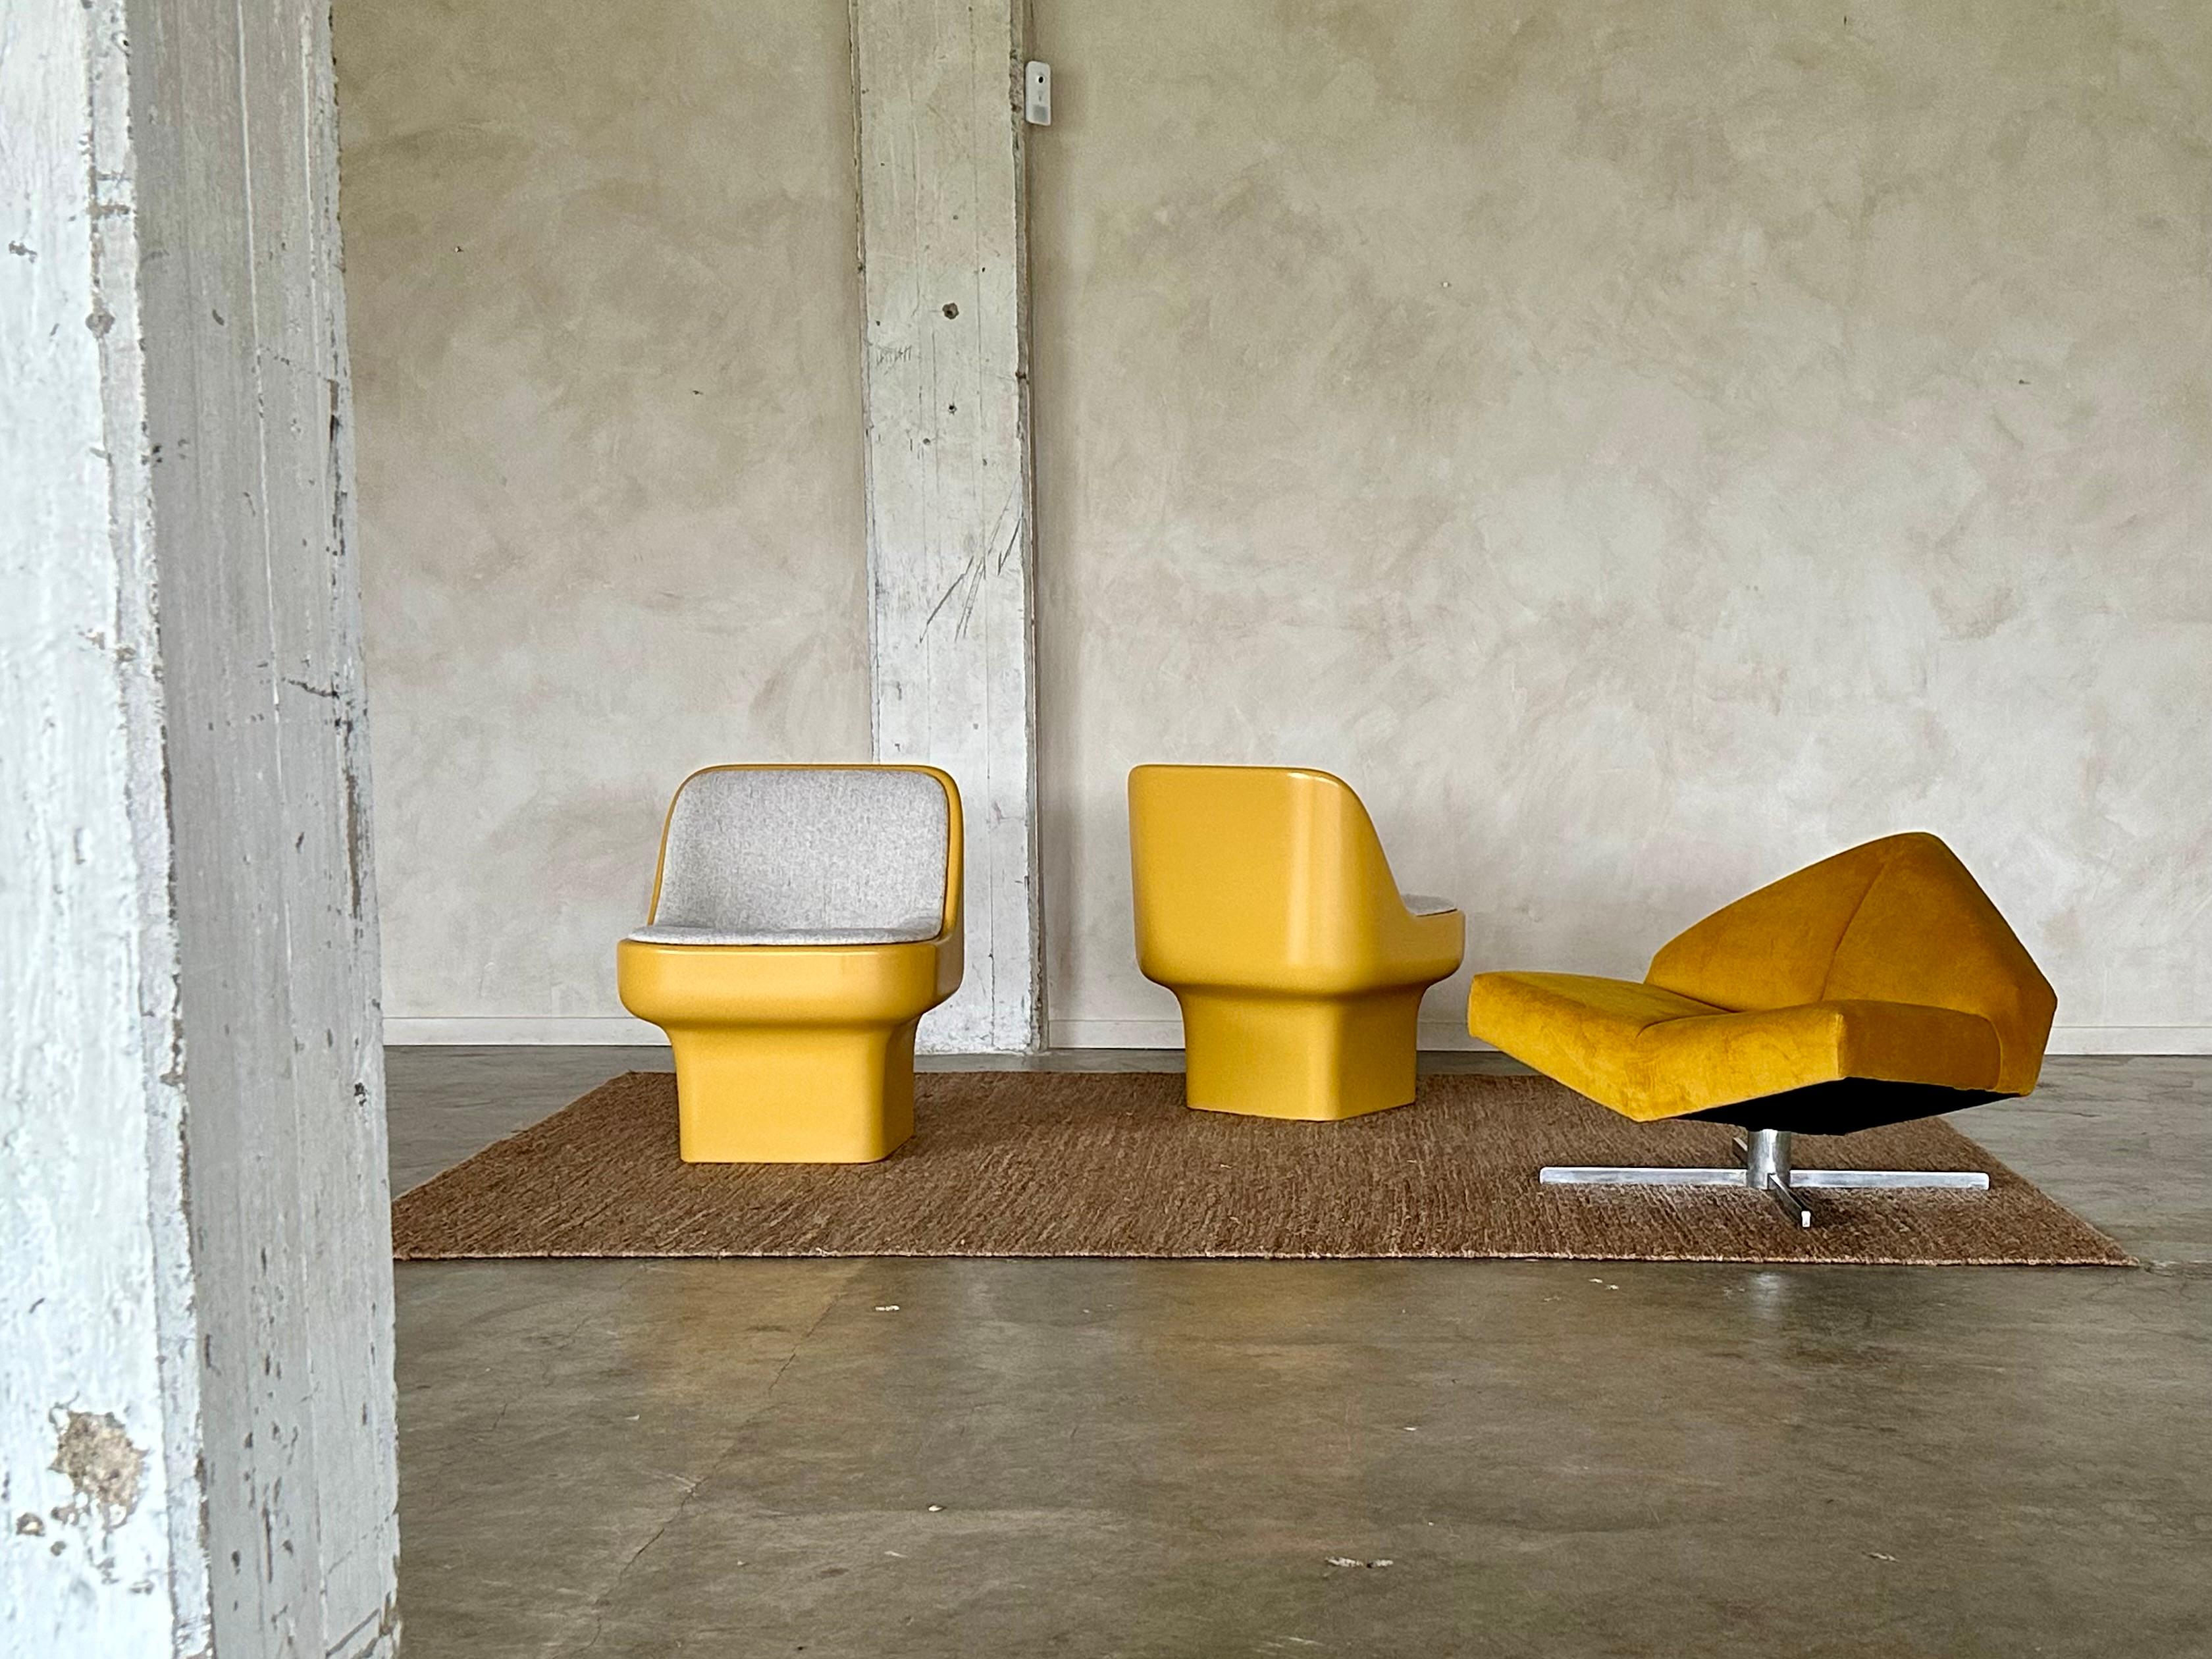 Set of Lounge Chairs by Douglas Deeds for Architectural Fiberglass Co, 1972 For Sale 3